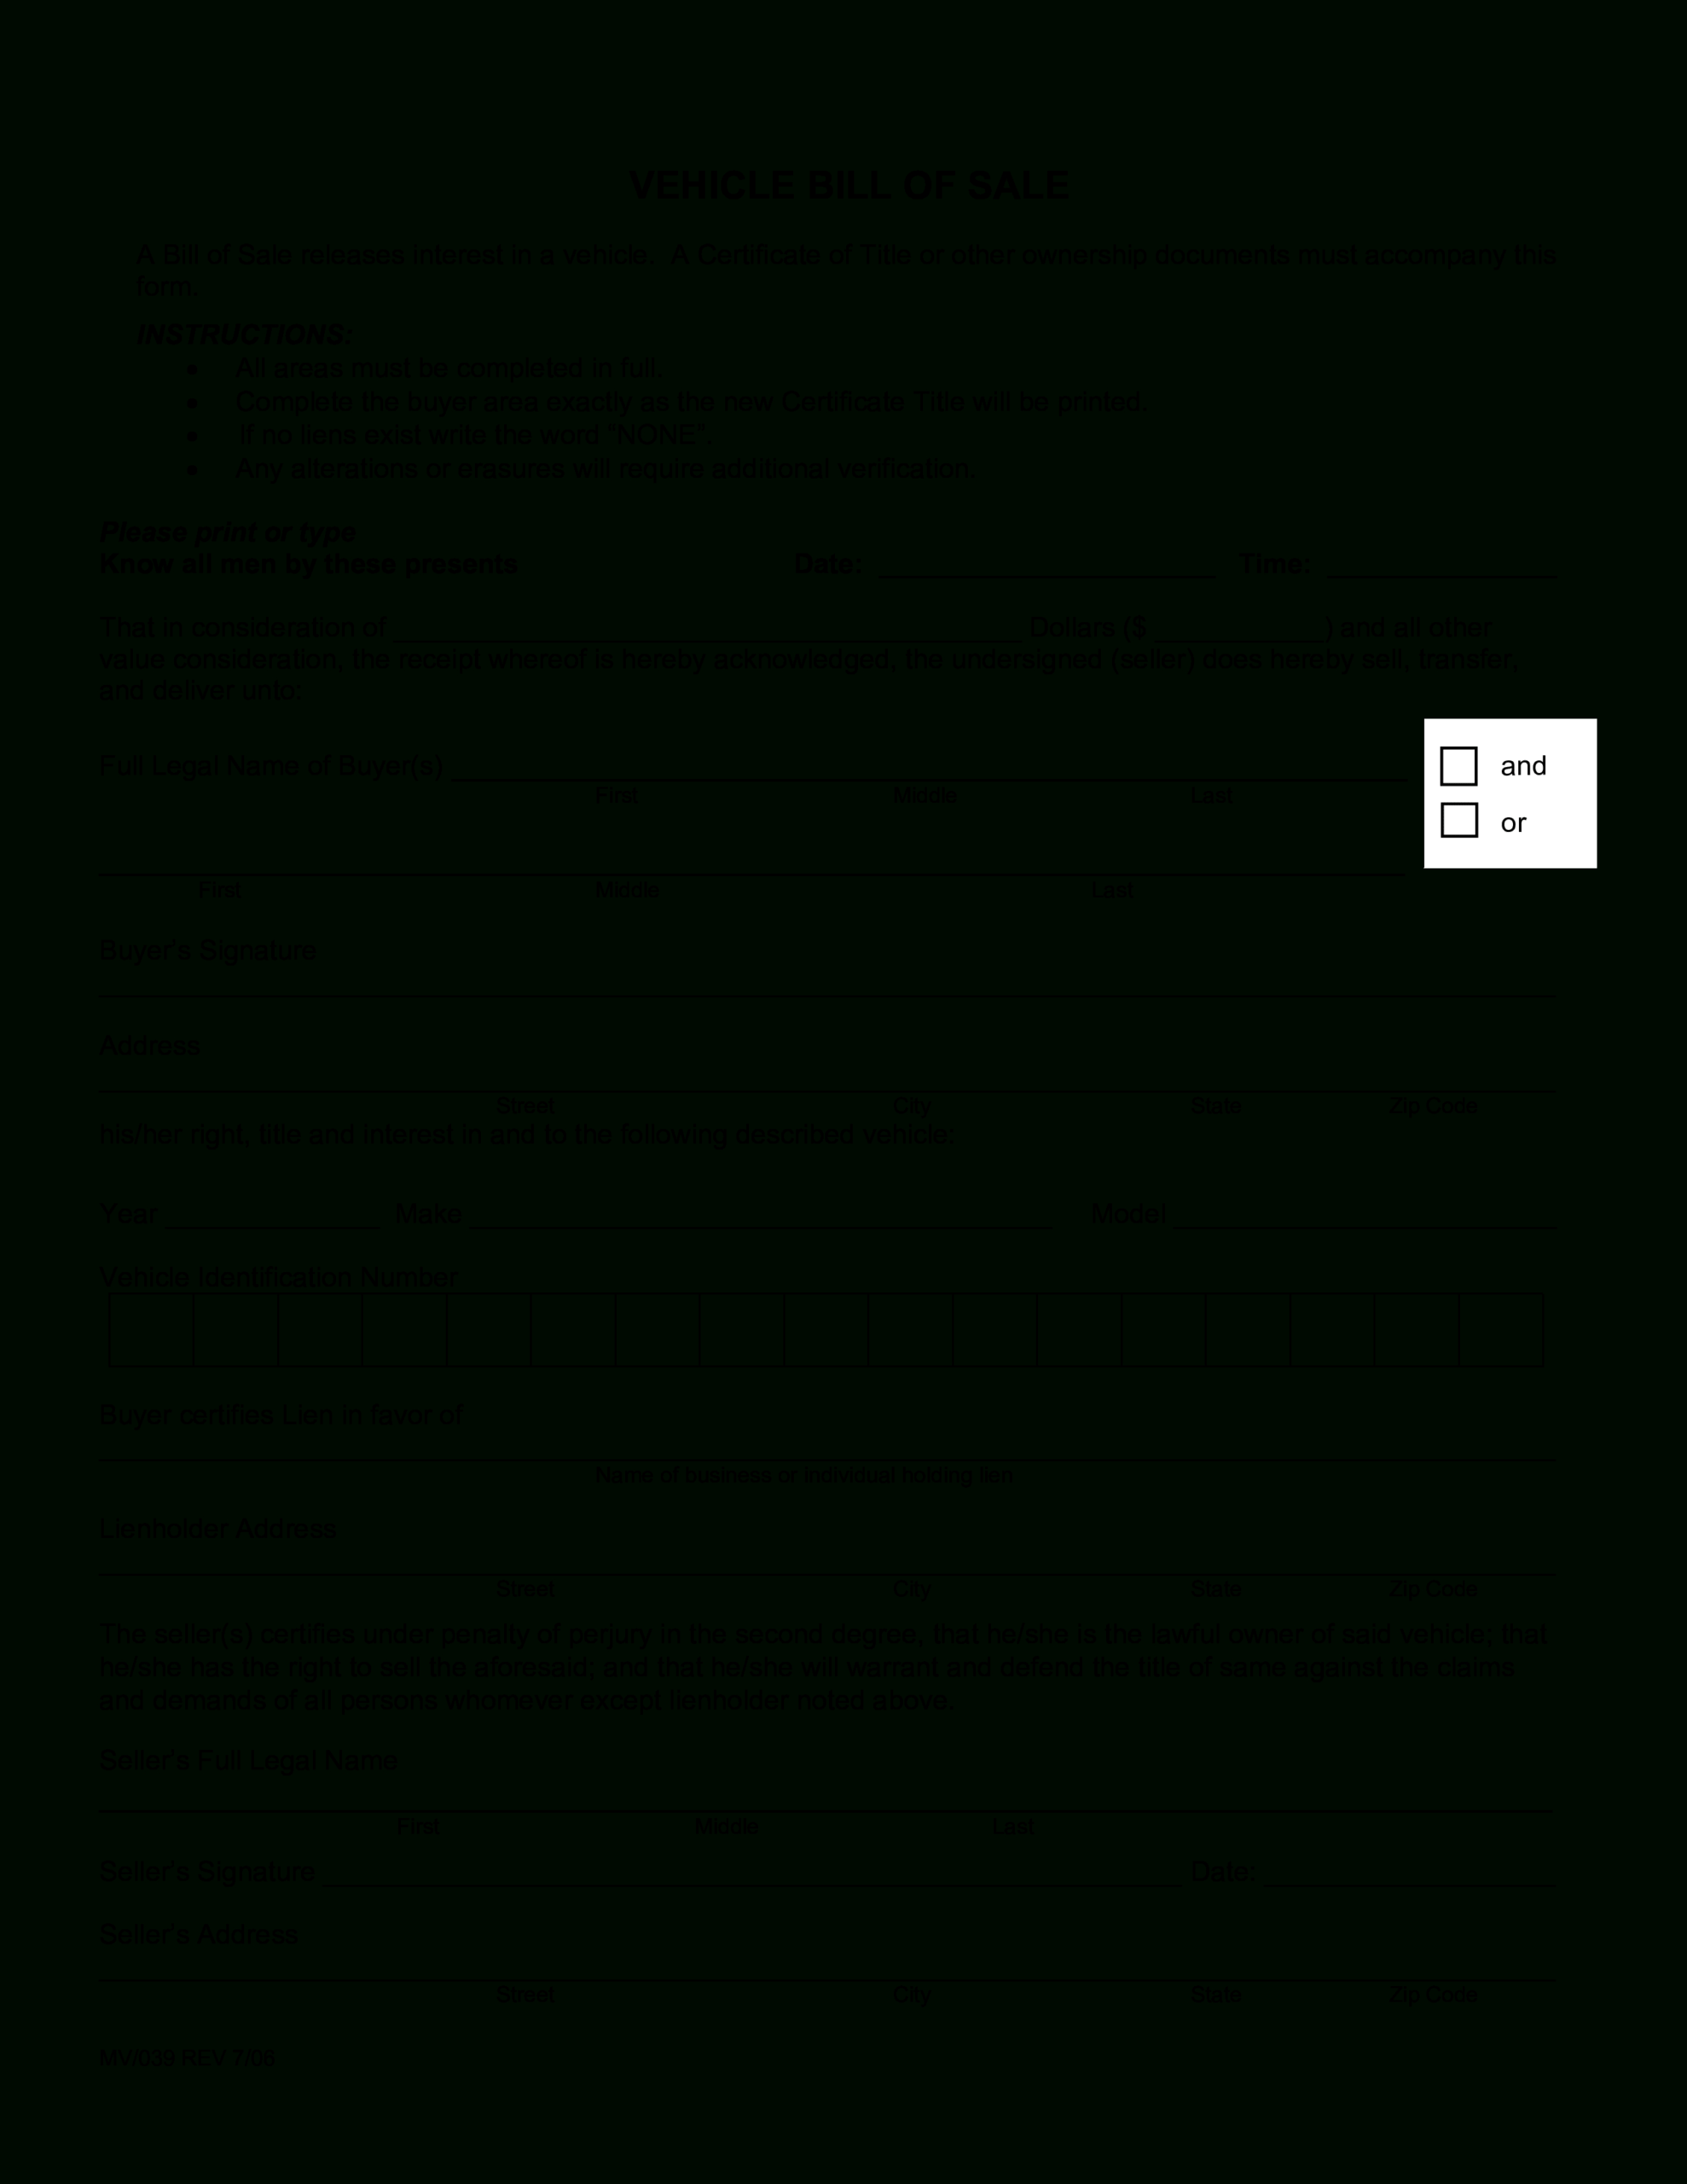 Legal Blank Bill Of Sale | Templates At Allbusinesstemplates Pertaining To Blank Legal Document Template